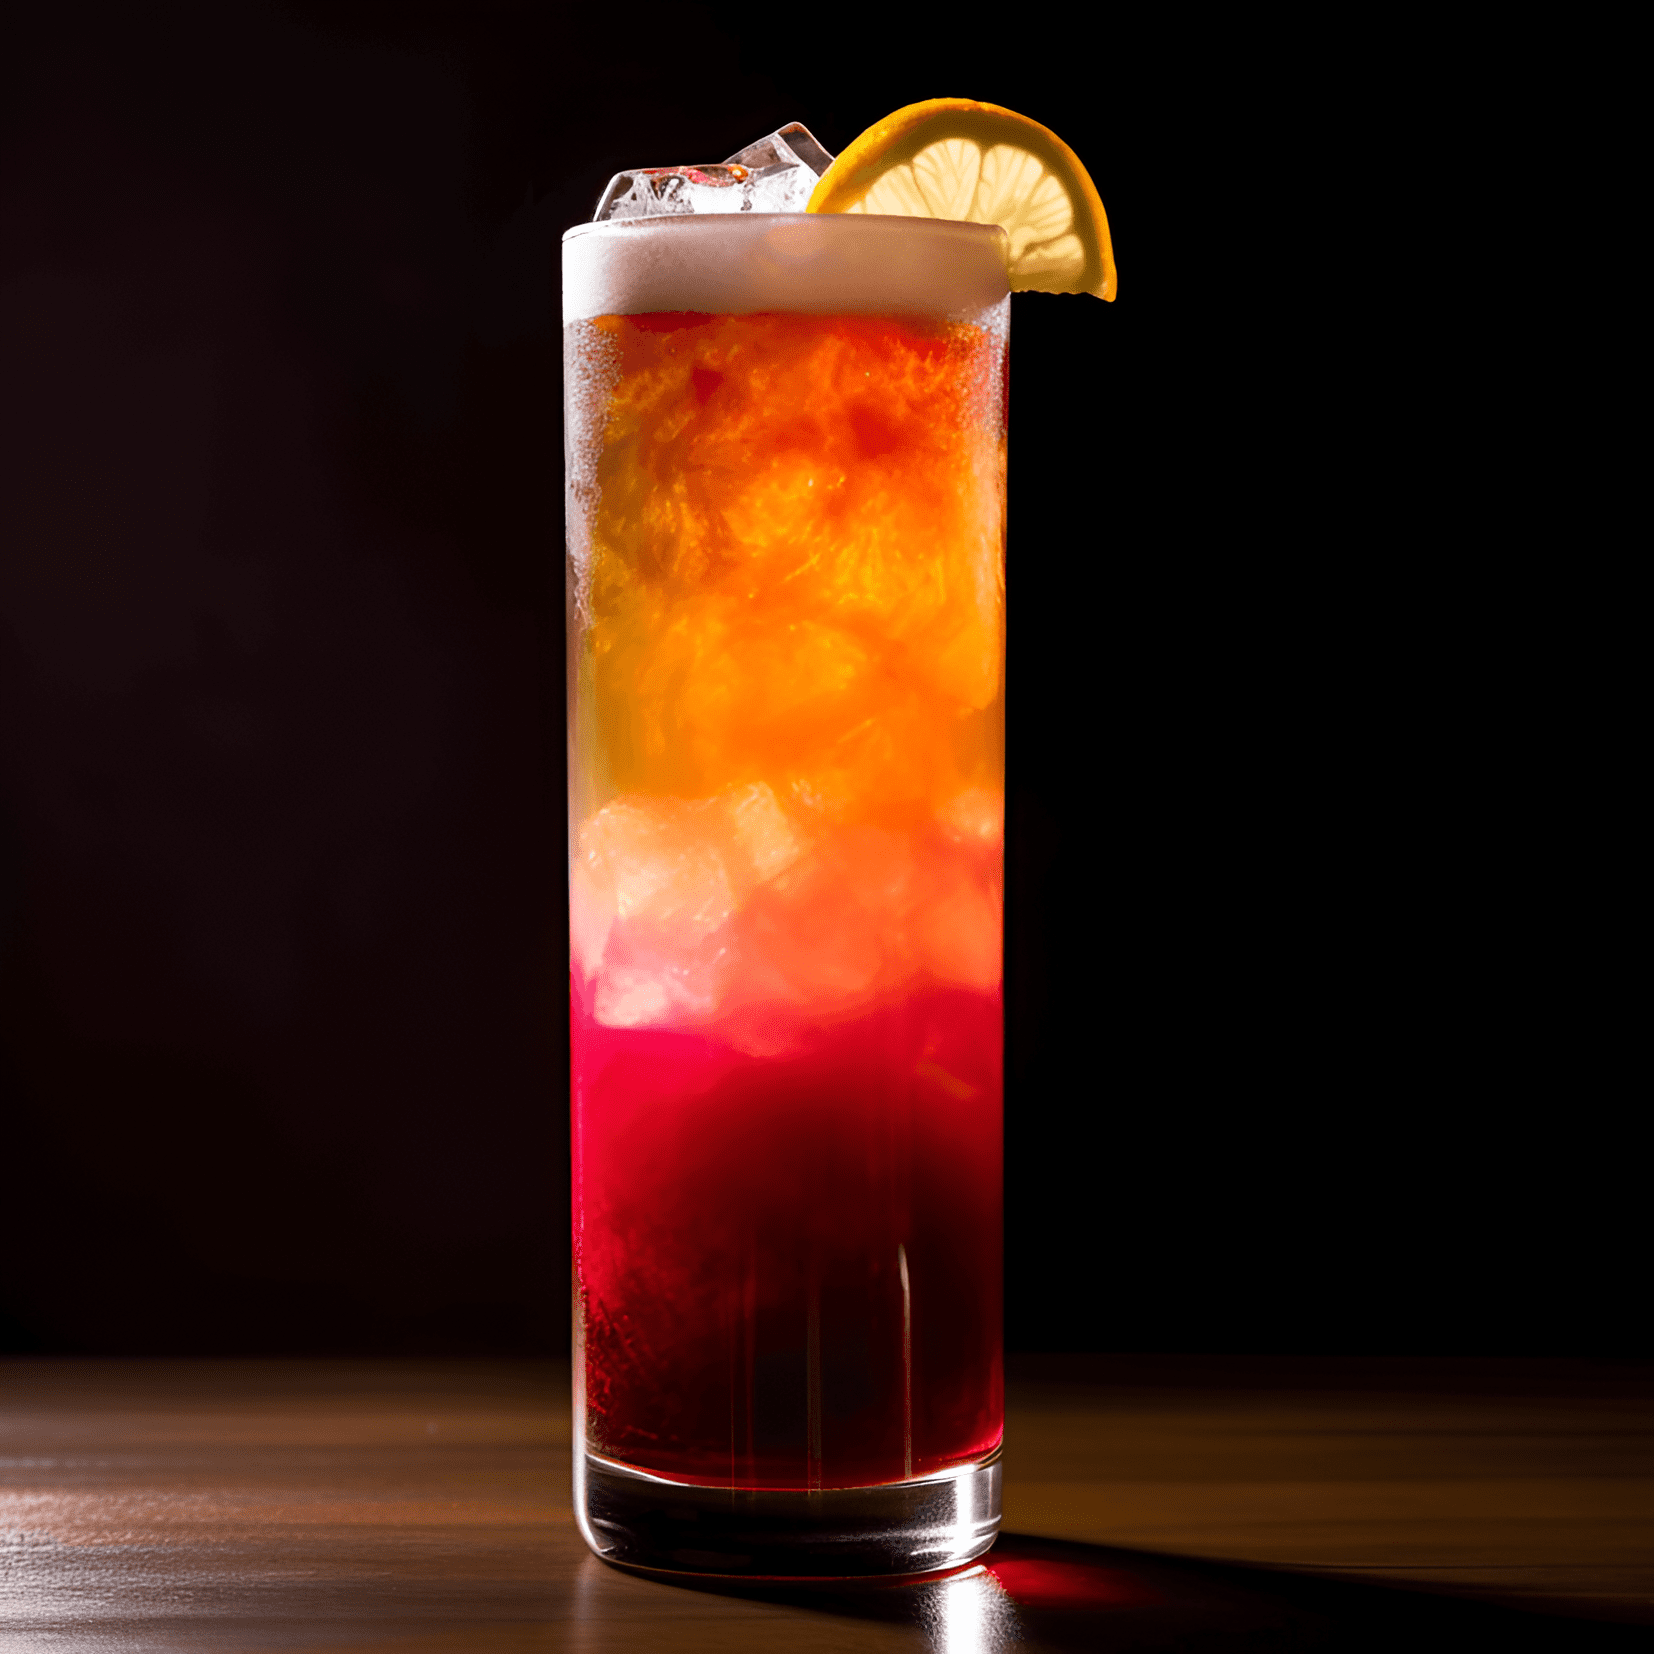 Sunburn Cocktail Recipe - The Sunburn cocktail is a delightful mix of sweet, sour, and fruity flavors. It has a tangy citrus taste from the orange and lemon juices, combined with the sweetness of the grenadine and the refreshing taste of pineapple. The vodka adds a subtle kick, making it a well-balanced and enjoyable drink.